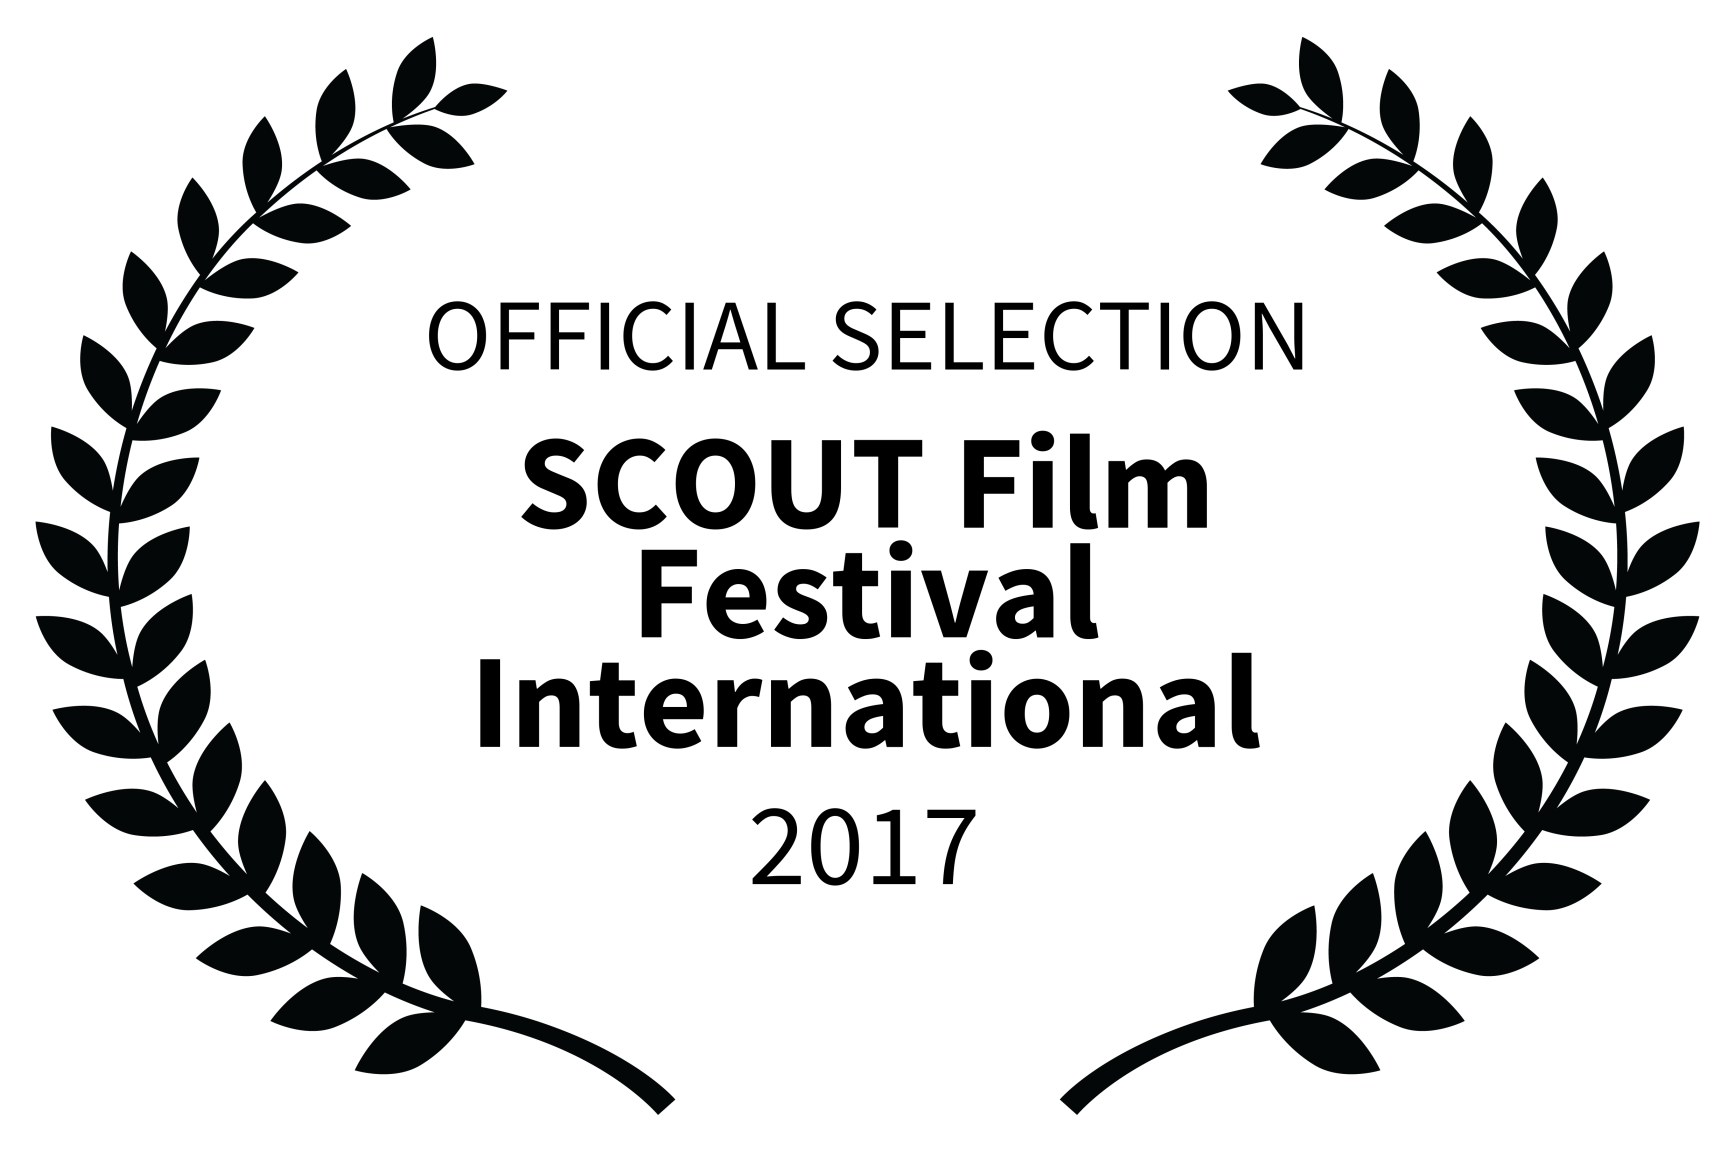 OFFICIAL SELECTION - SCOUT Film Festival International - 2017